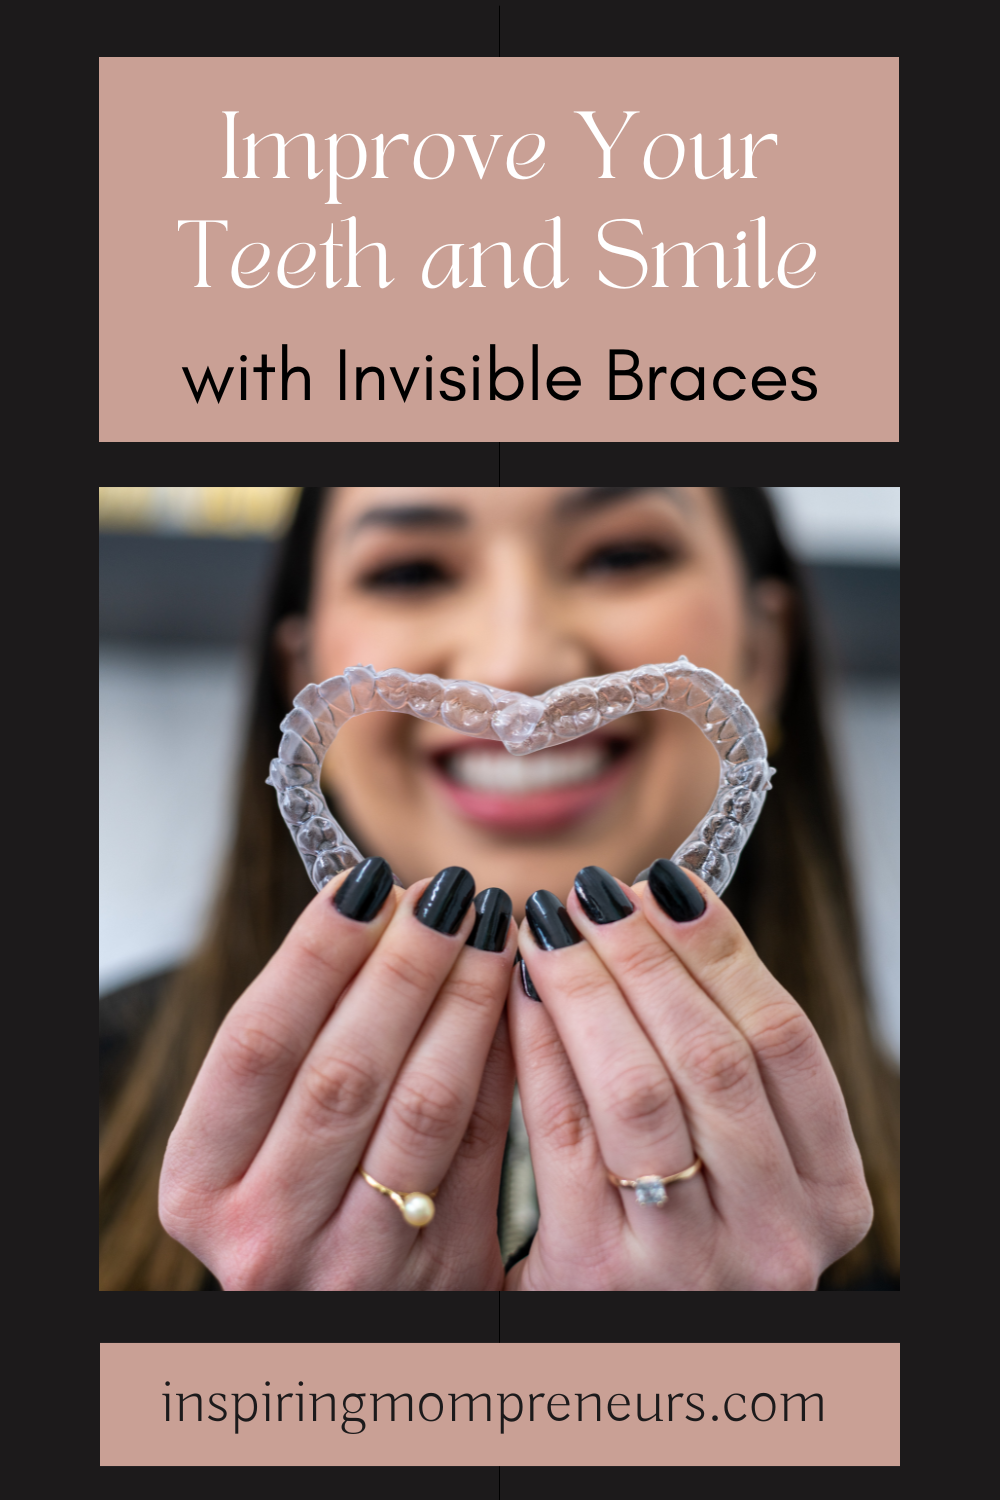 Studies show that those with a beautiful white smile are thought to be more attractive. Here's how you can improve your teeth and smile with invisible braces.